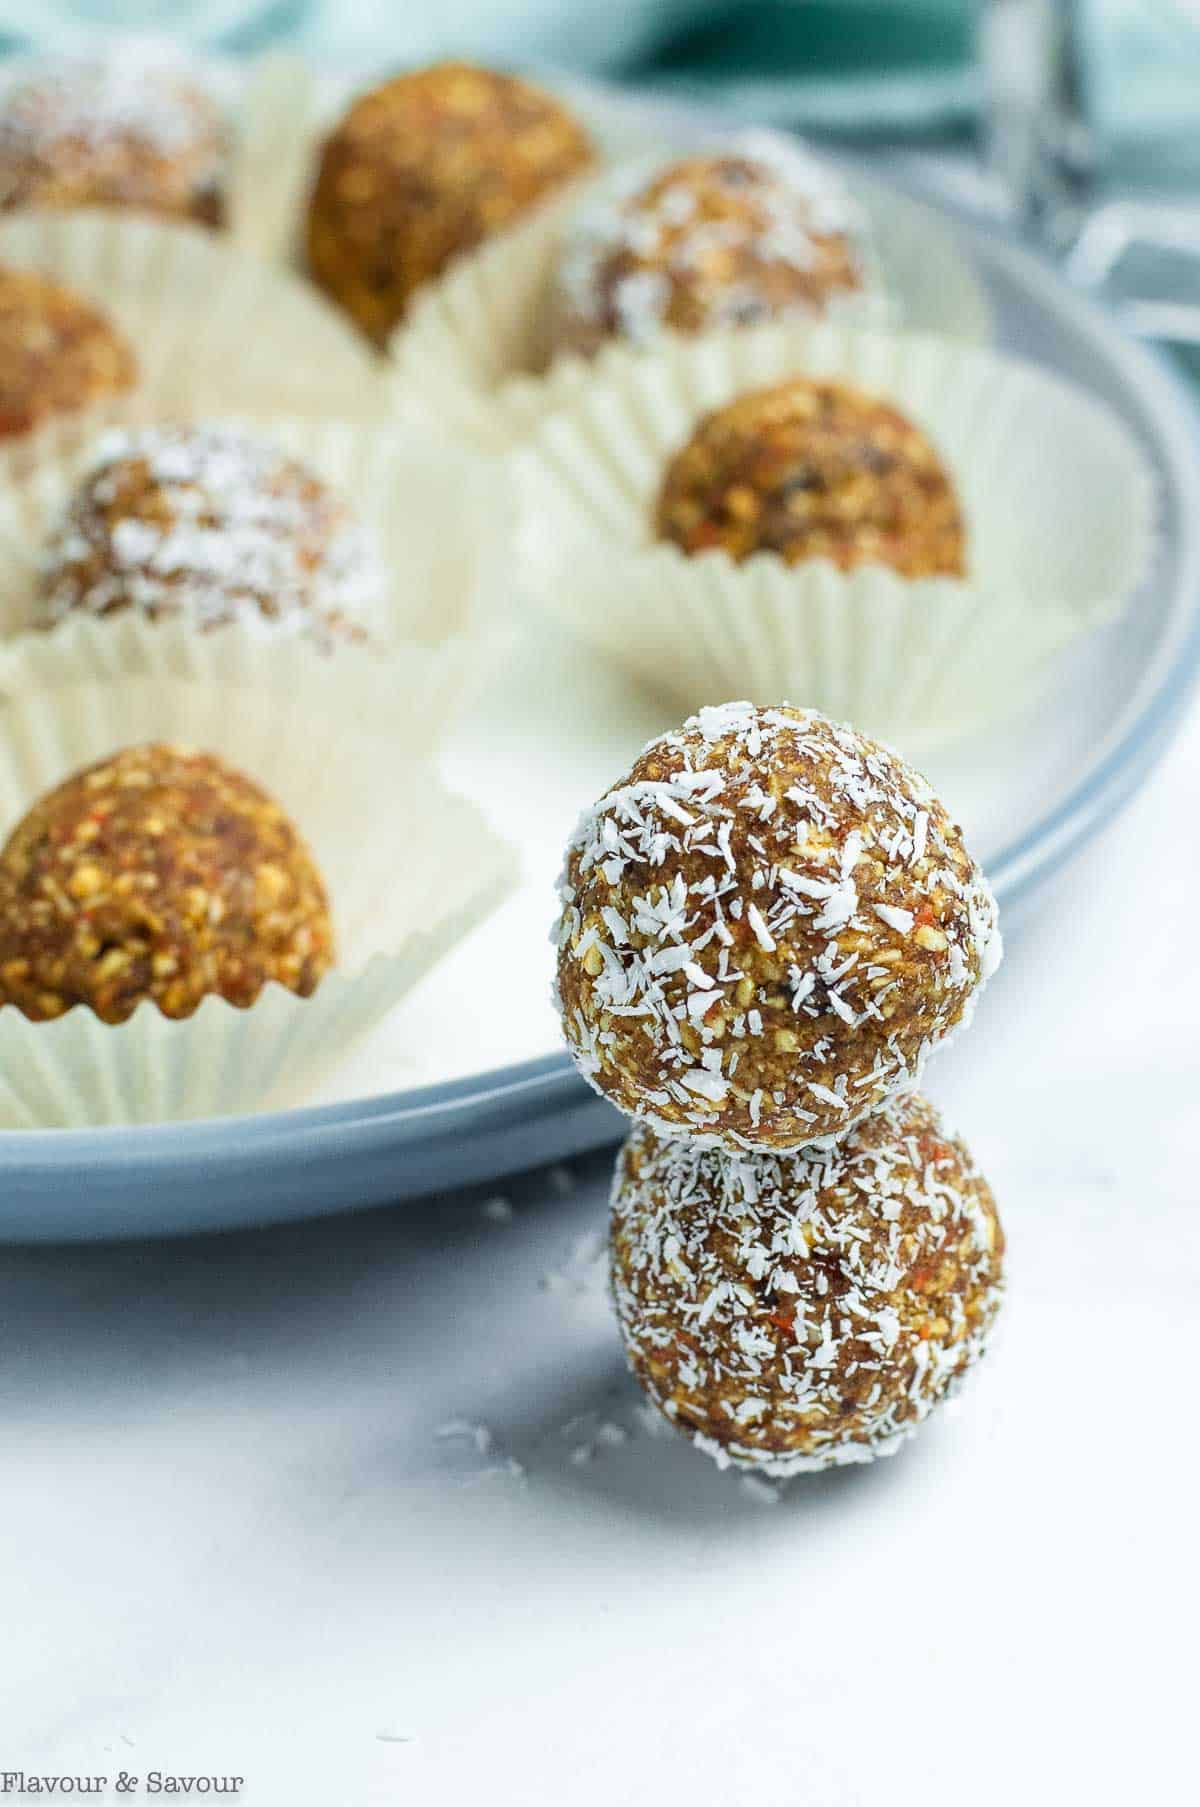 Two nut-free carrot energy balls, stacked.